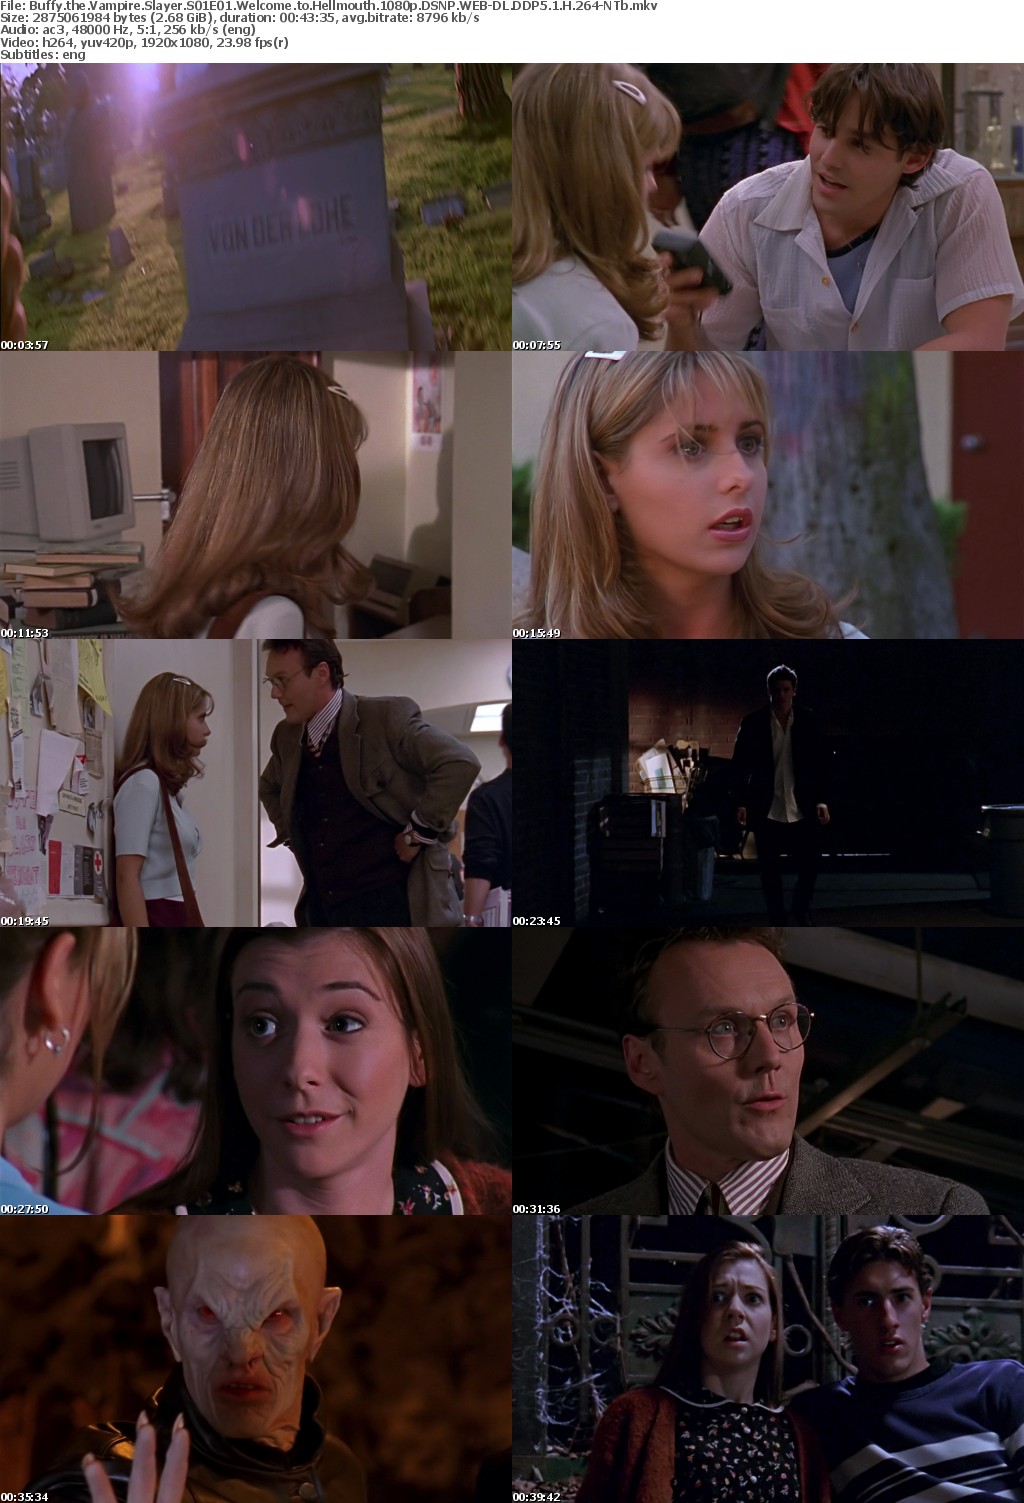 Buffy the Vampire Slayer S01E01 Welcome to Hellmouth 1080p DSNP WEB-DL DDP5 1 H 264-NTb